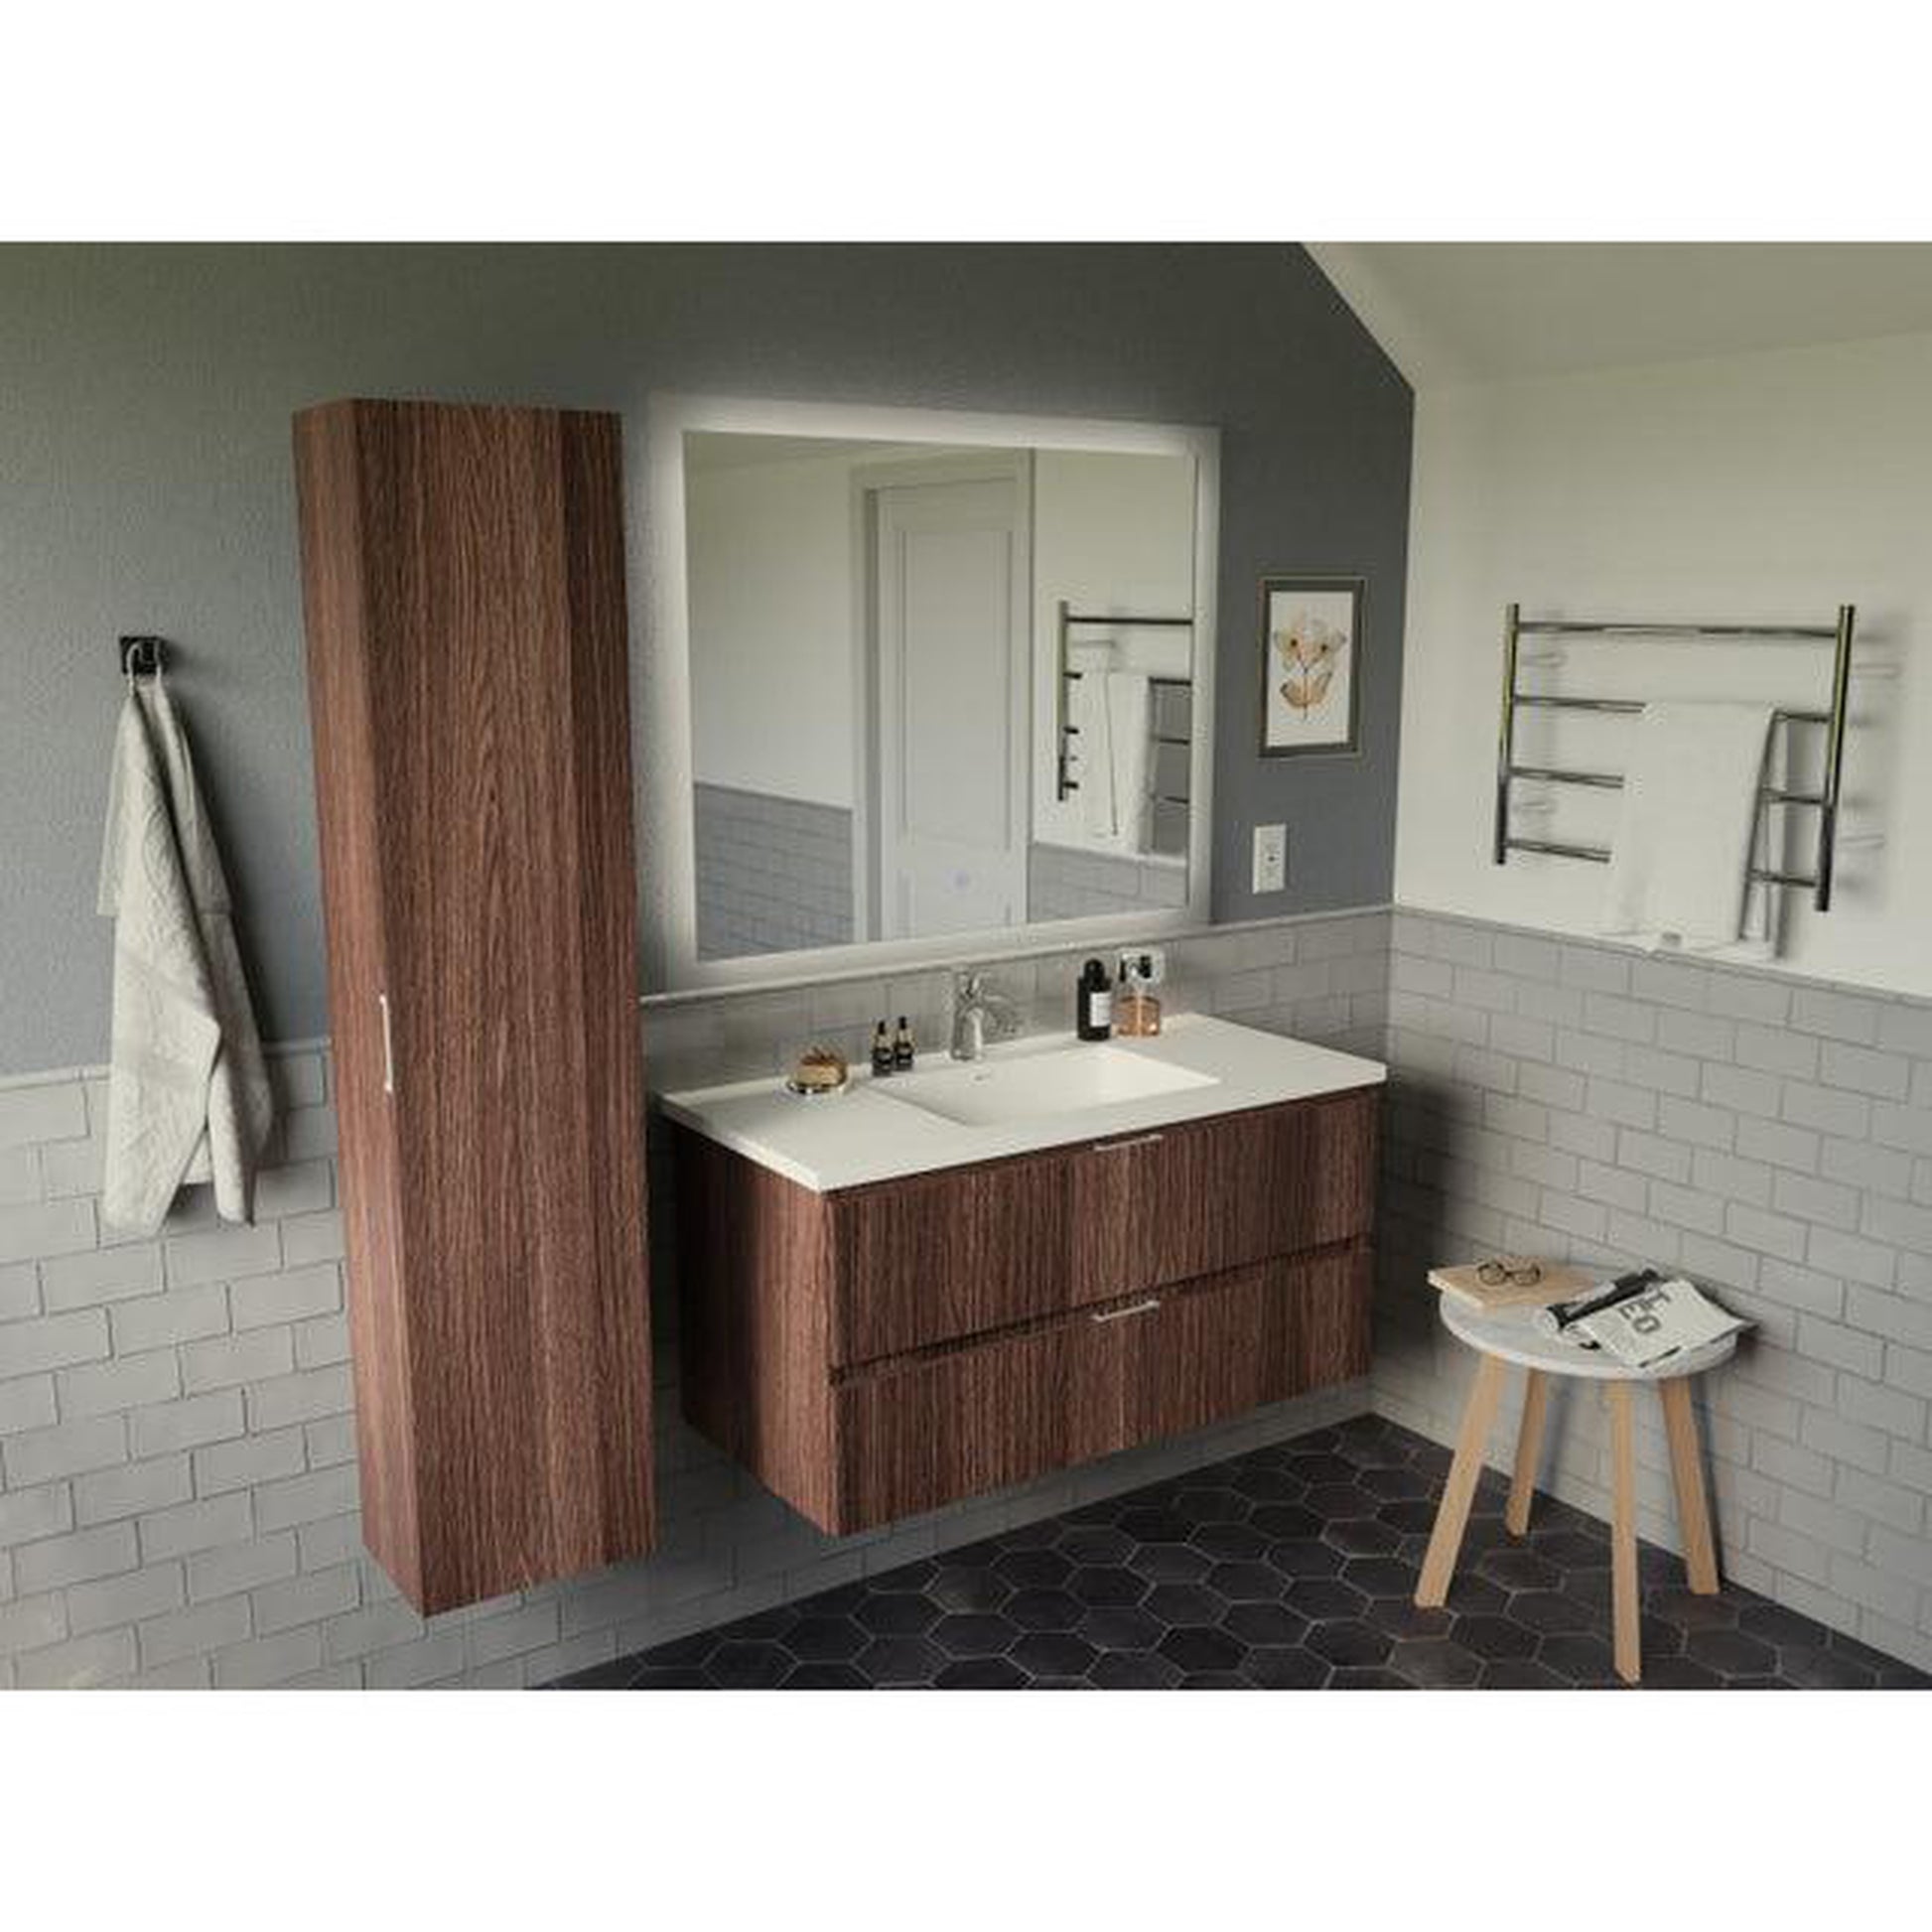 ANZZI Conques 39" x 20" Dark Brown Solid Wood Bathroom Vanity With Glossy White Countertop With Sink, 39" LED Mirror and Side Cabinet